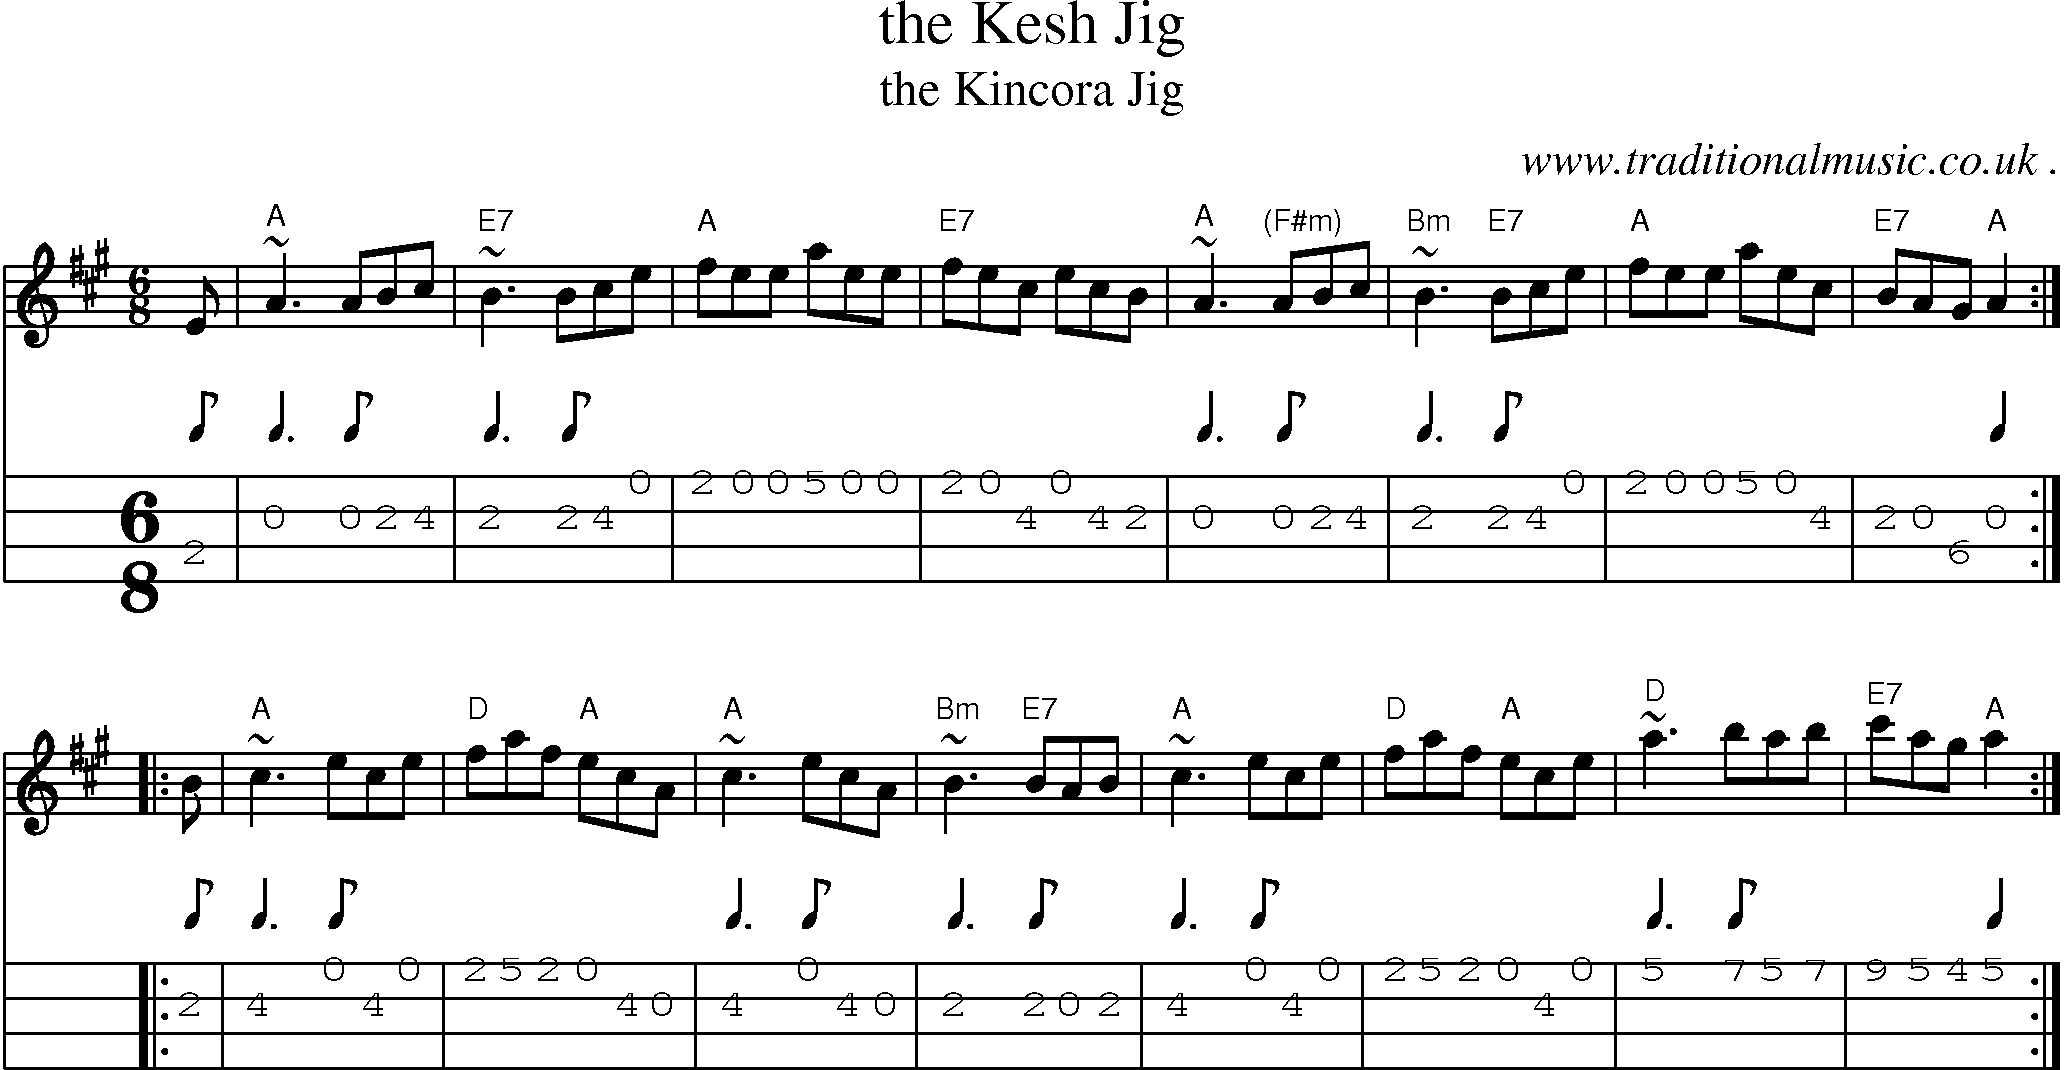 Sheet-music  score, Chords and Mandolin Tabs for The Kesh Jig